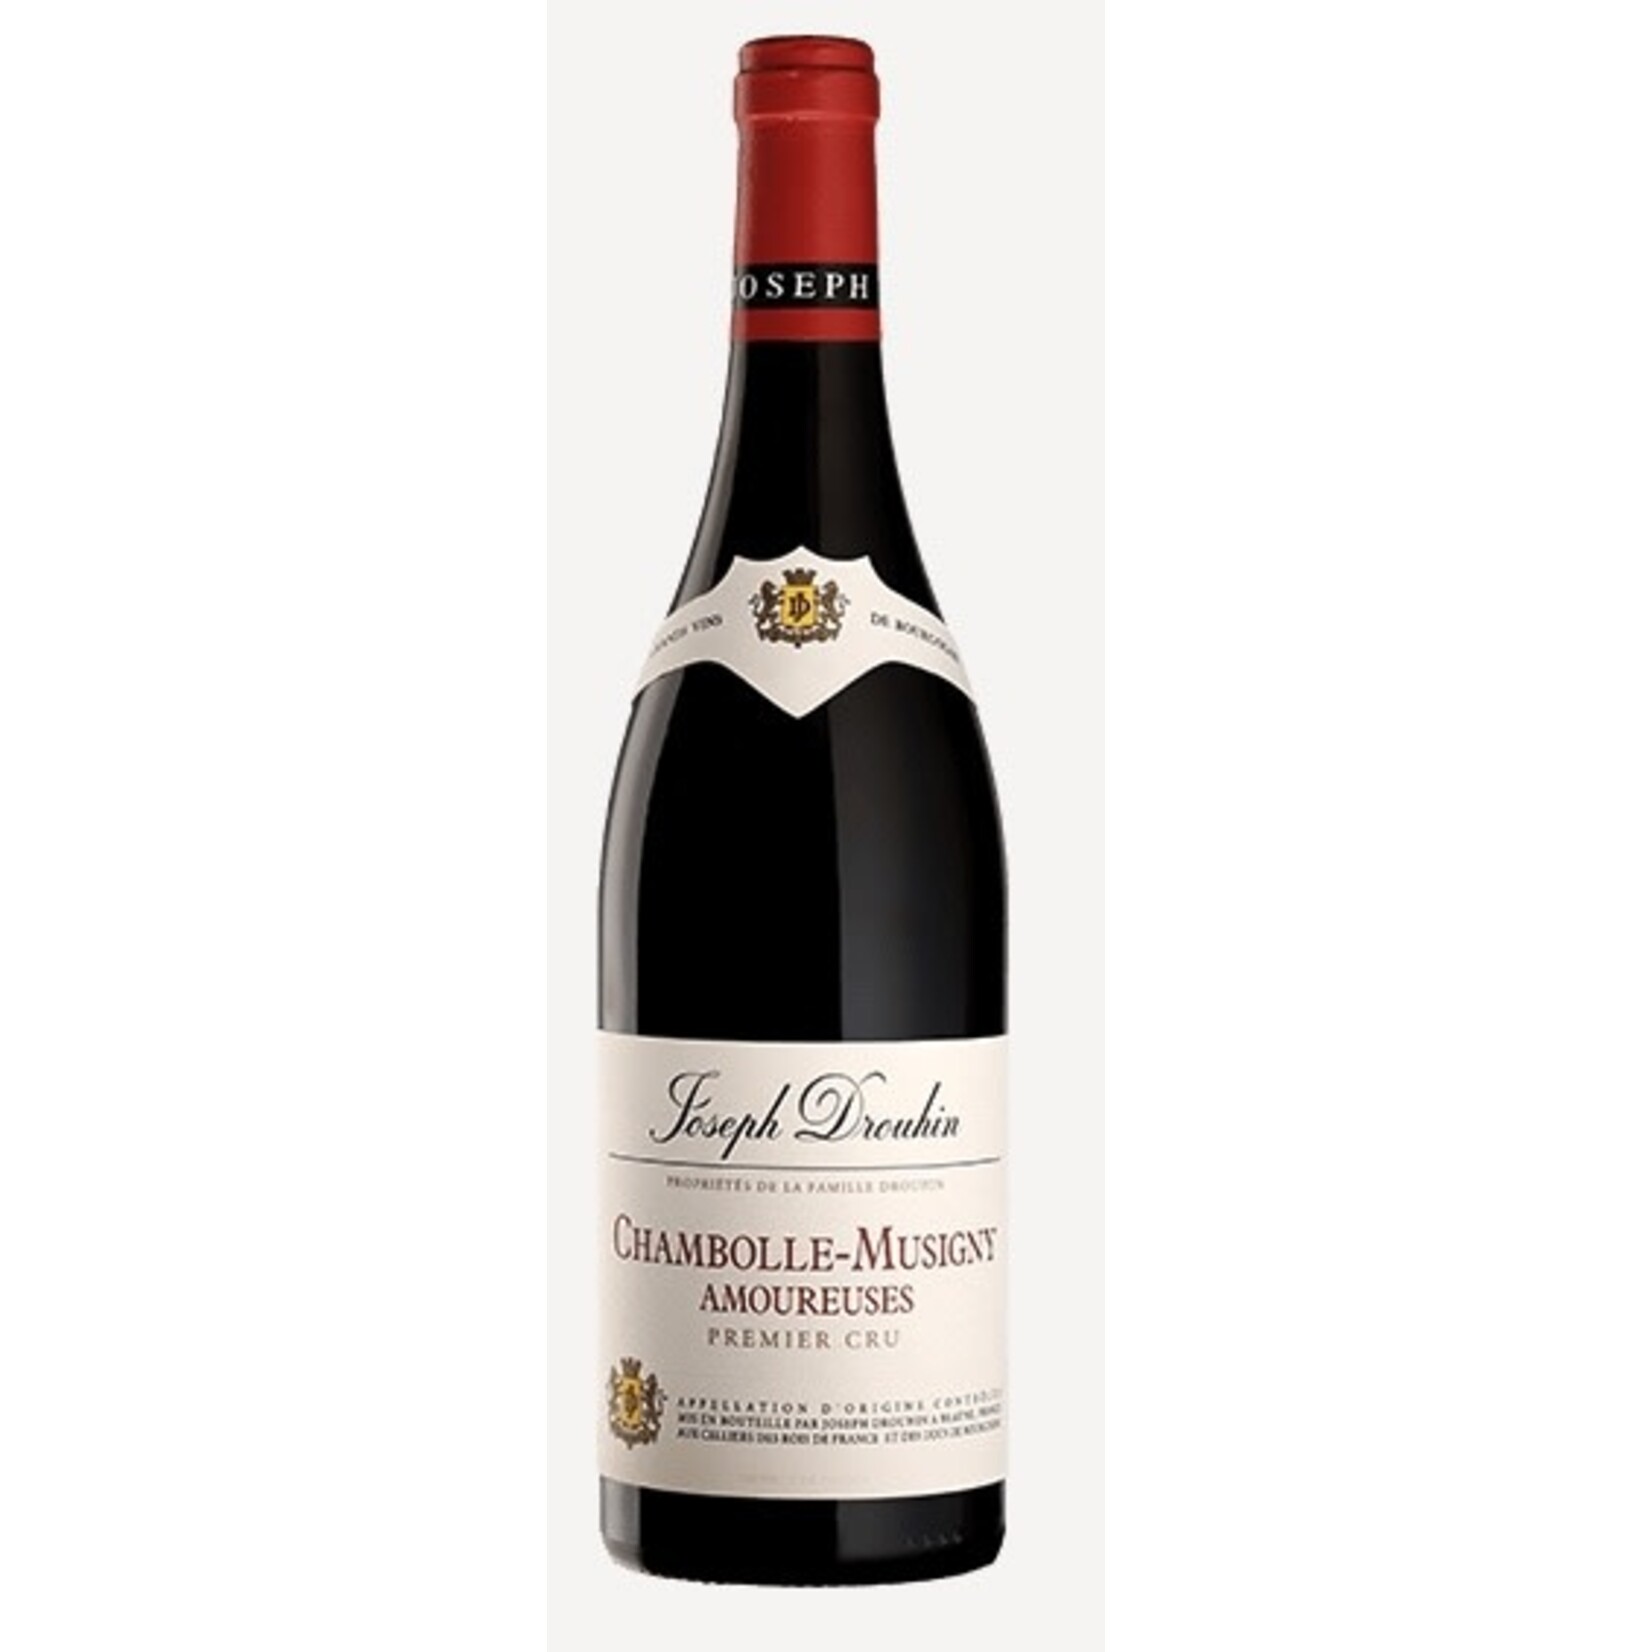 Wine Drouhin Chambolle Musigny Les Amoureuses Premier Cru 2020